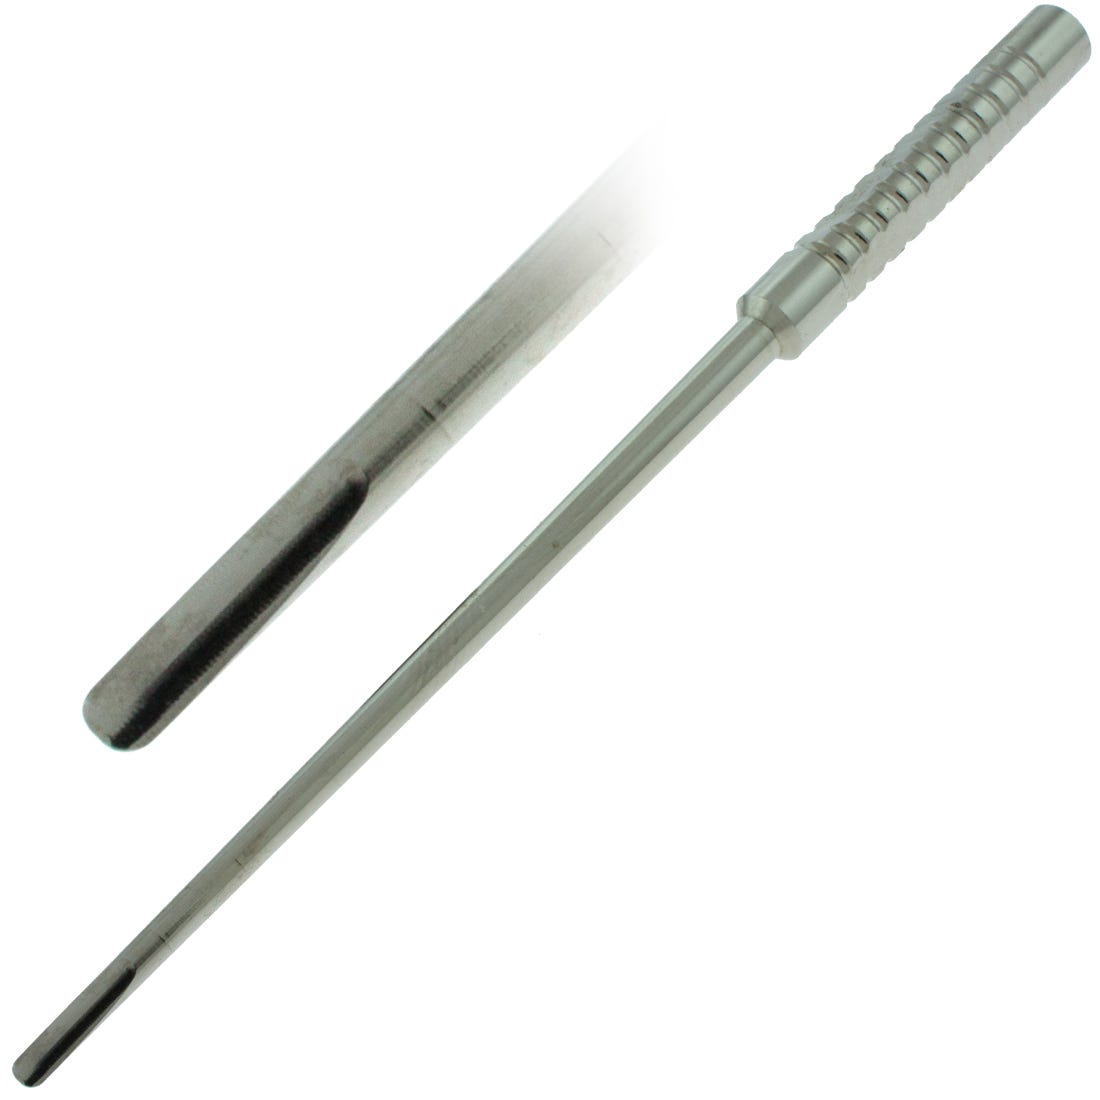 Bone Core Separator Tool to use with two piece trephine burs